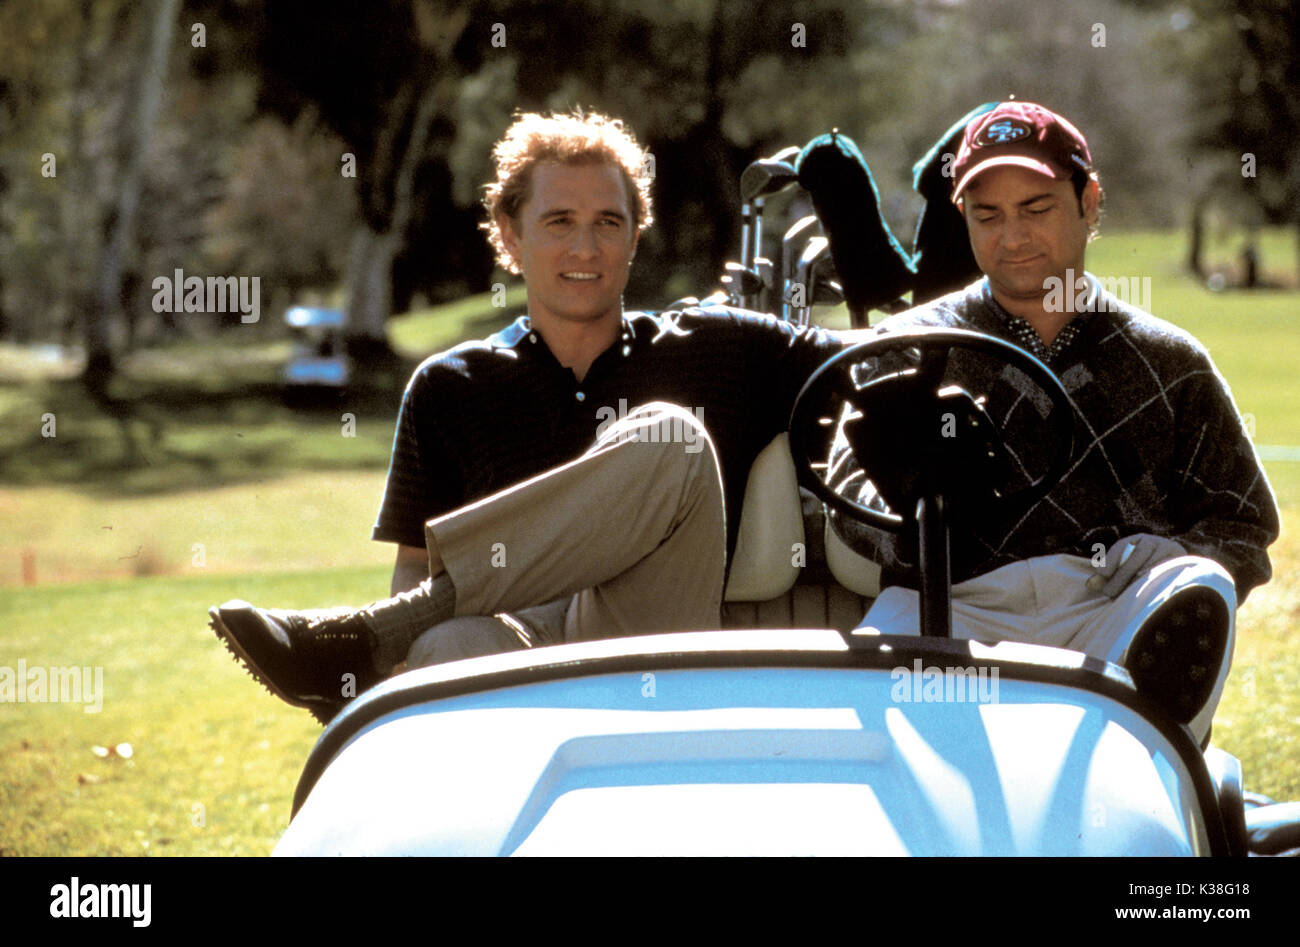 WEDDING PLANNER MATTHEW MCCONAUGHEY AND KEVIN POLLAK SUBJECT: GOLF, GOLF CART, DOCTORS     Date: 2001 Stock Photo